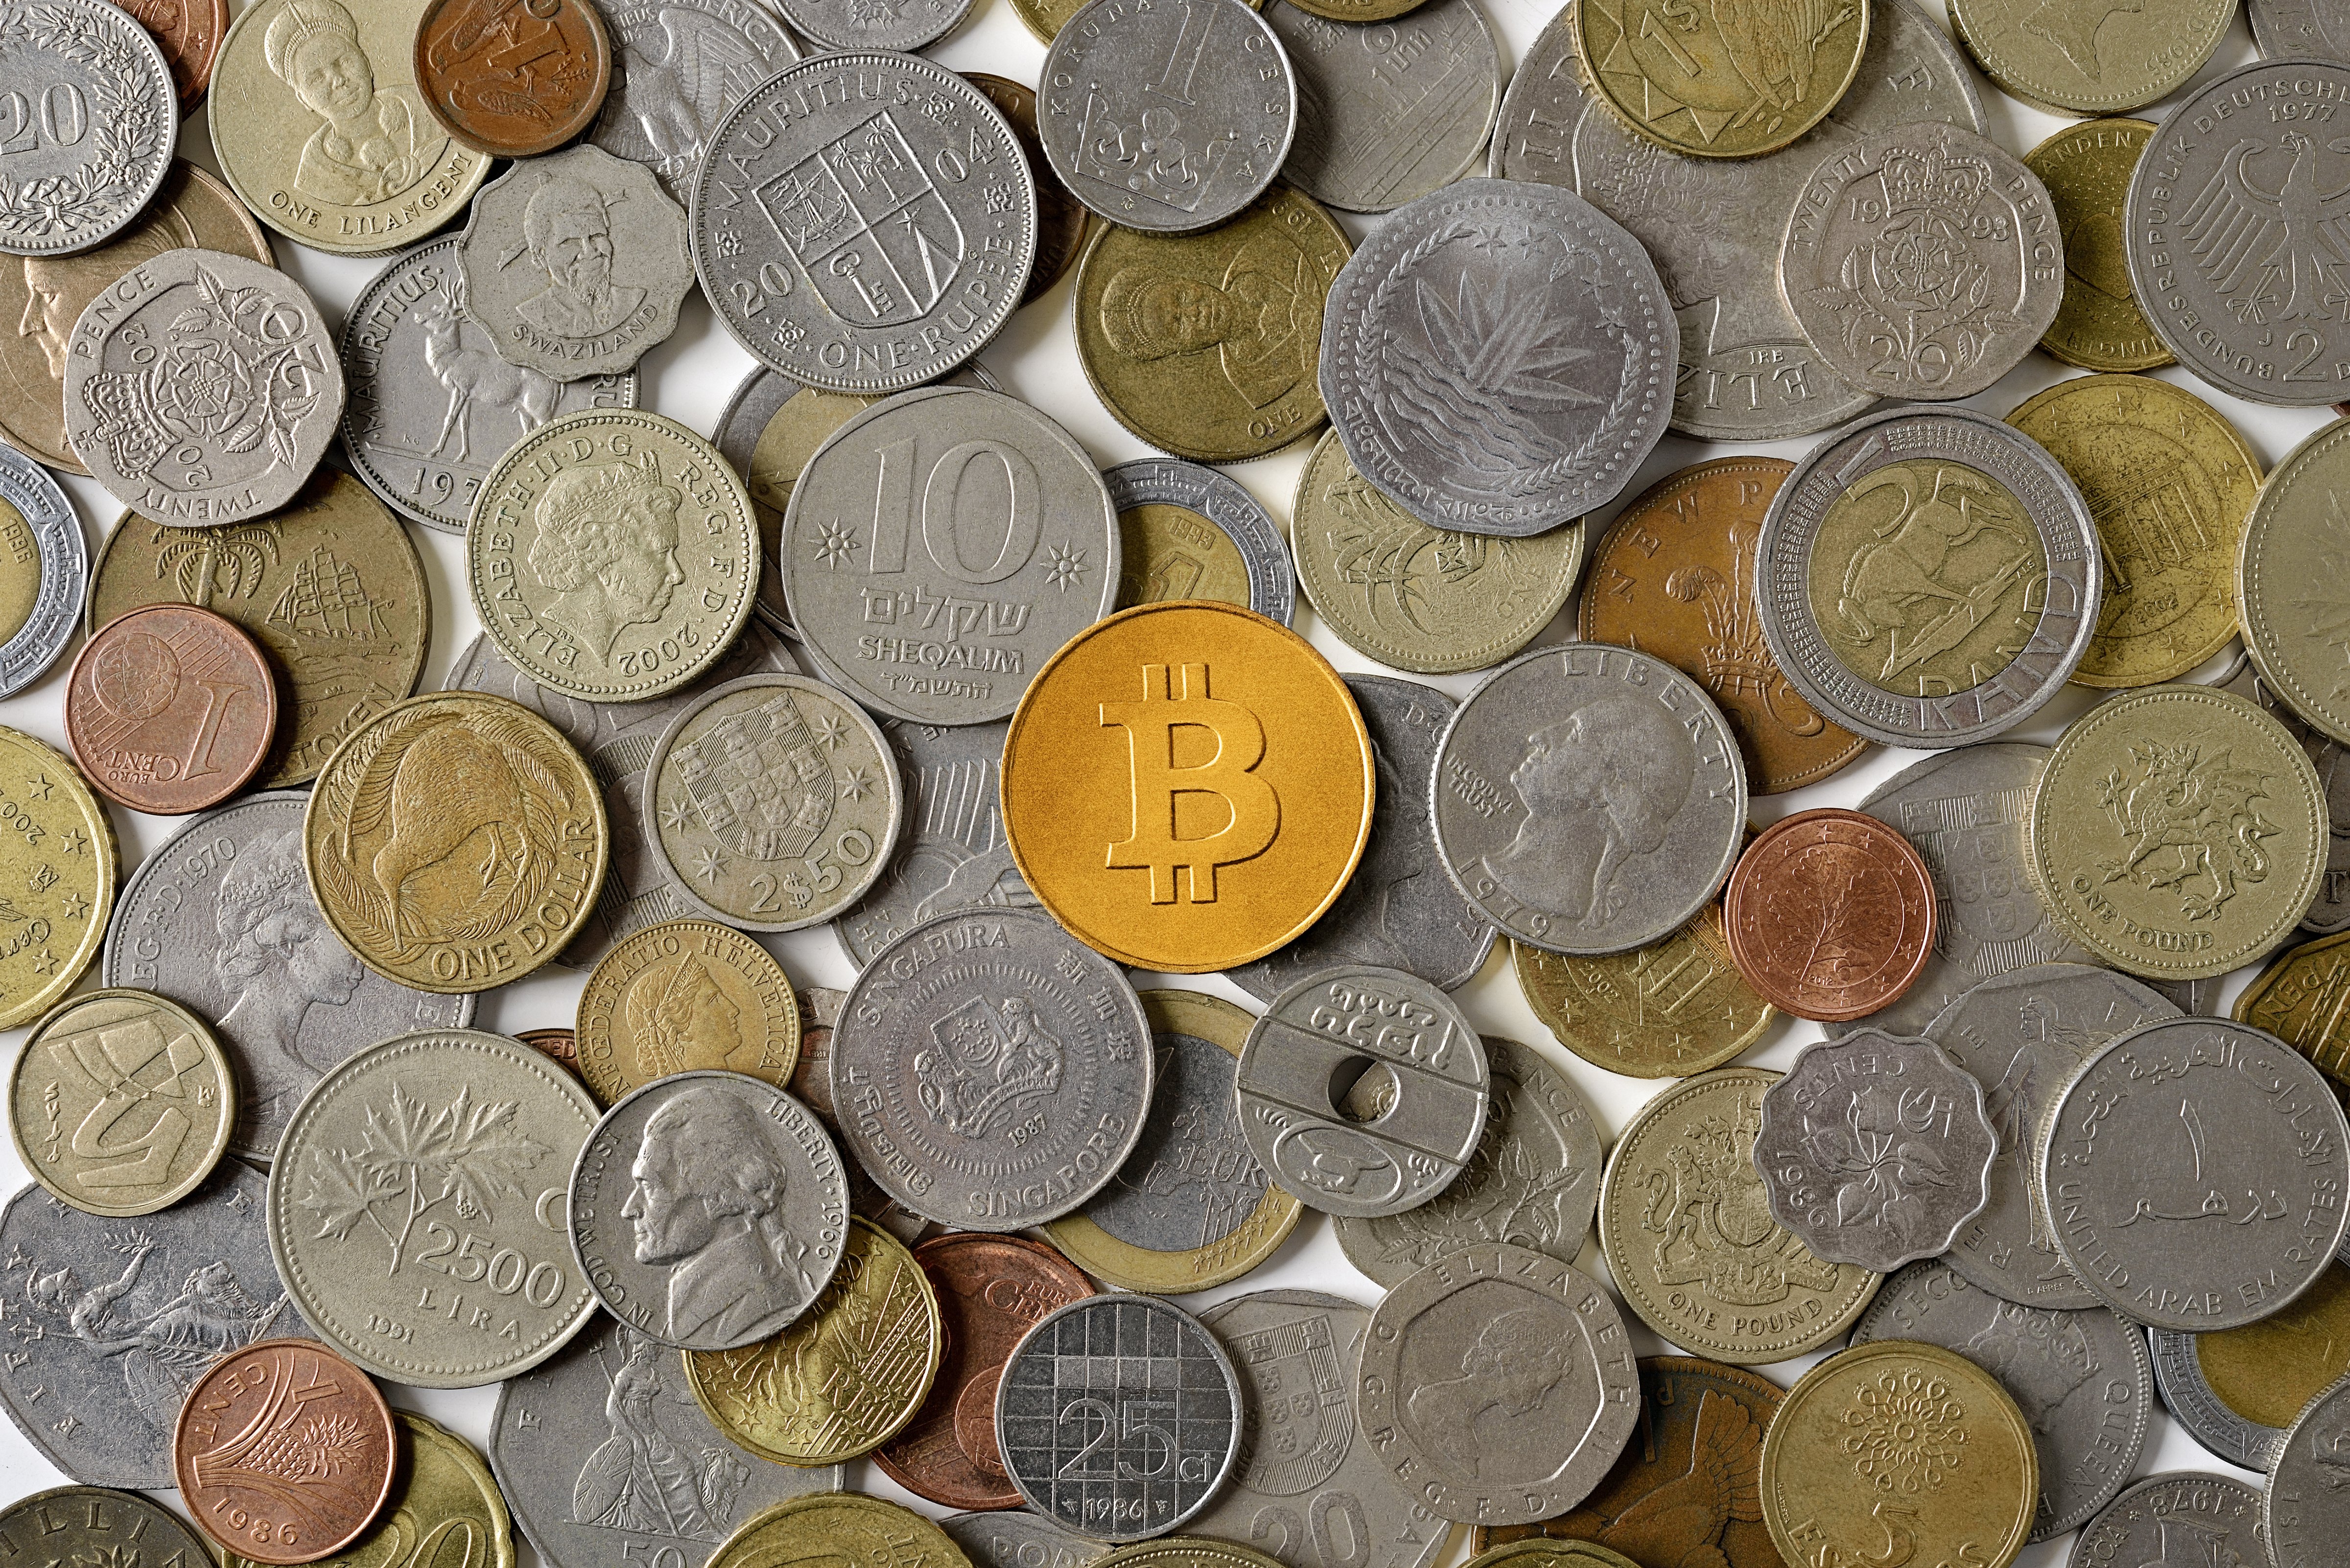 Bitcoin surrounded by various world coins (Getty Images)